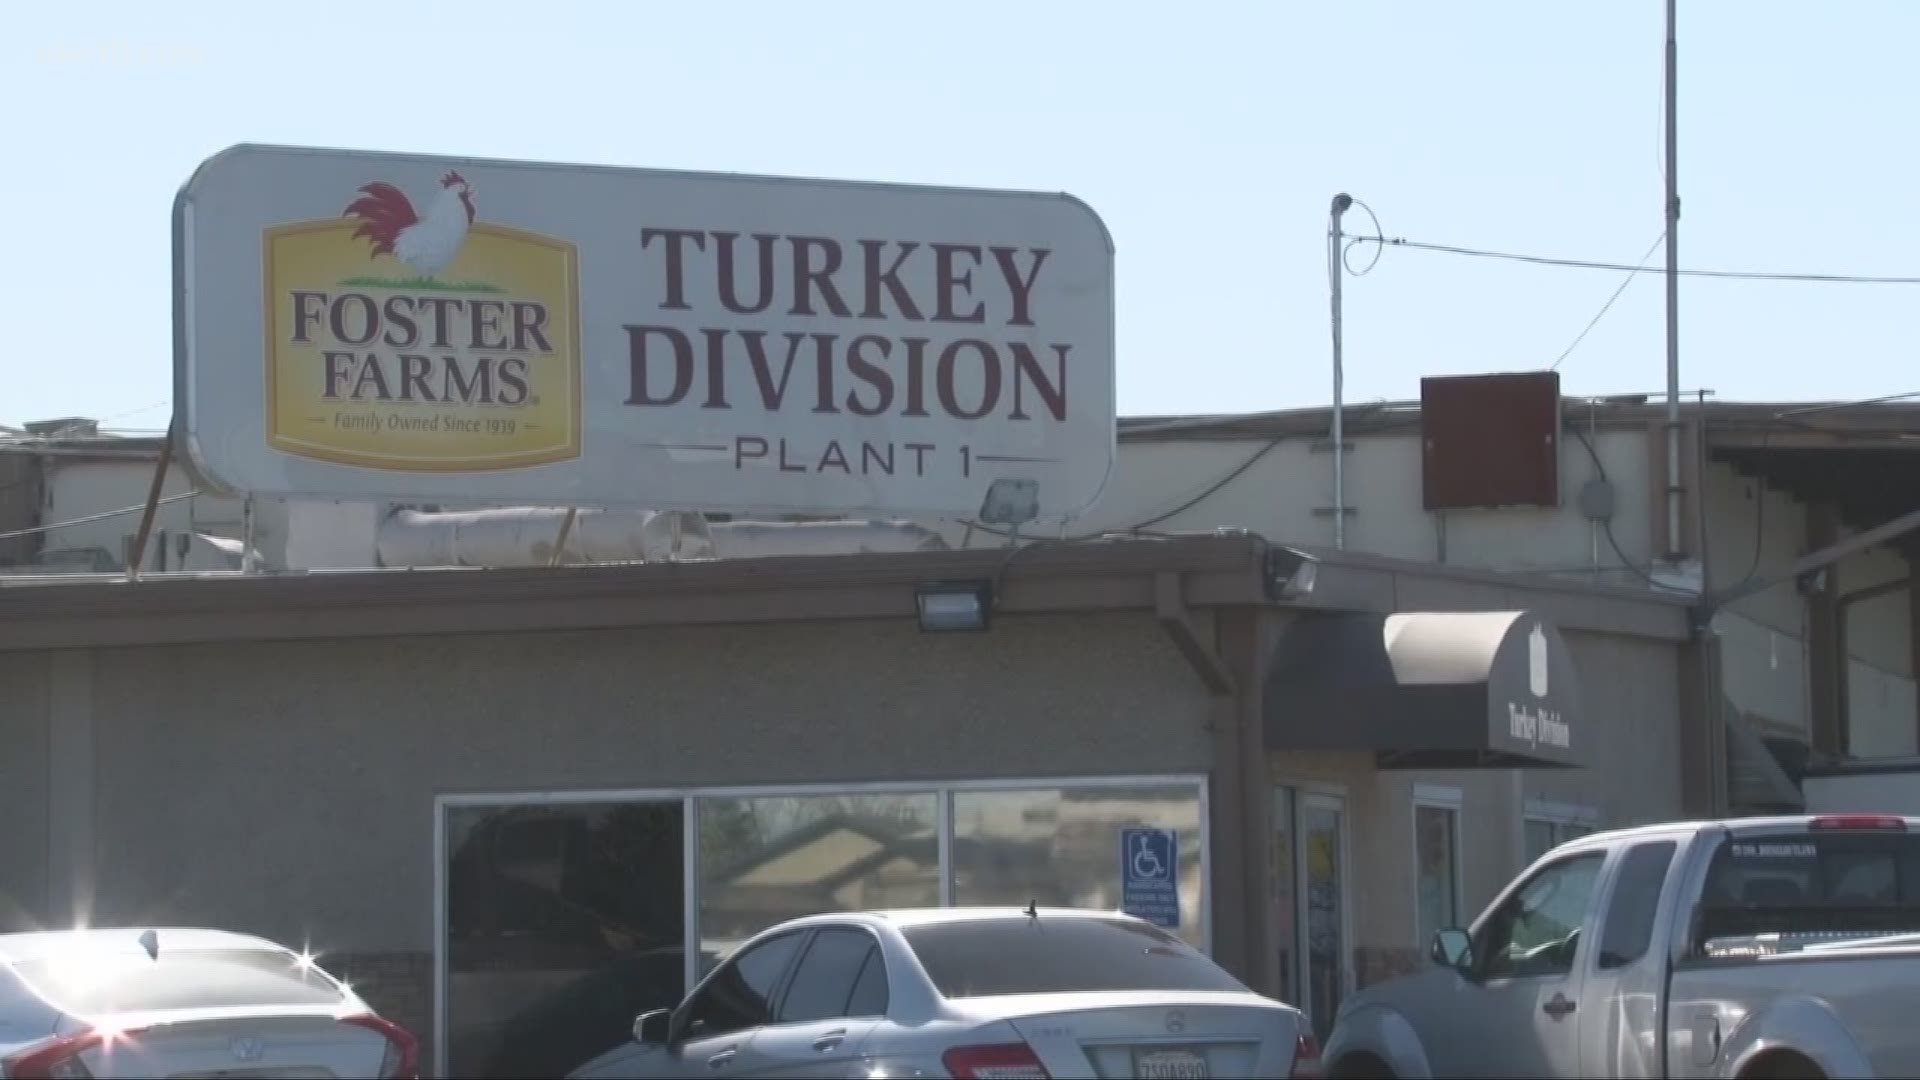 Tyson Foods, one of the largest food companies in the country, is reported to be talking to the Central Valley's Foster Farms about a possible buyout.